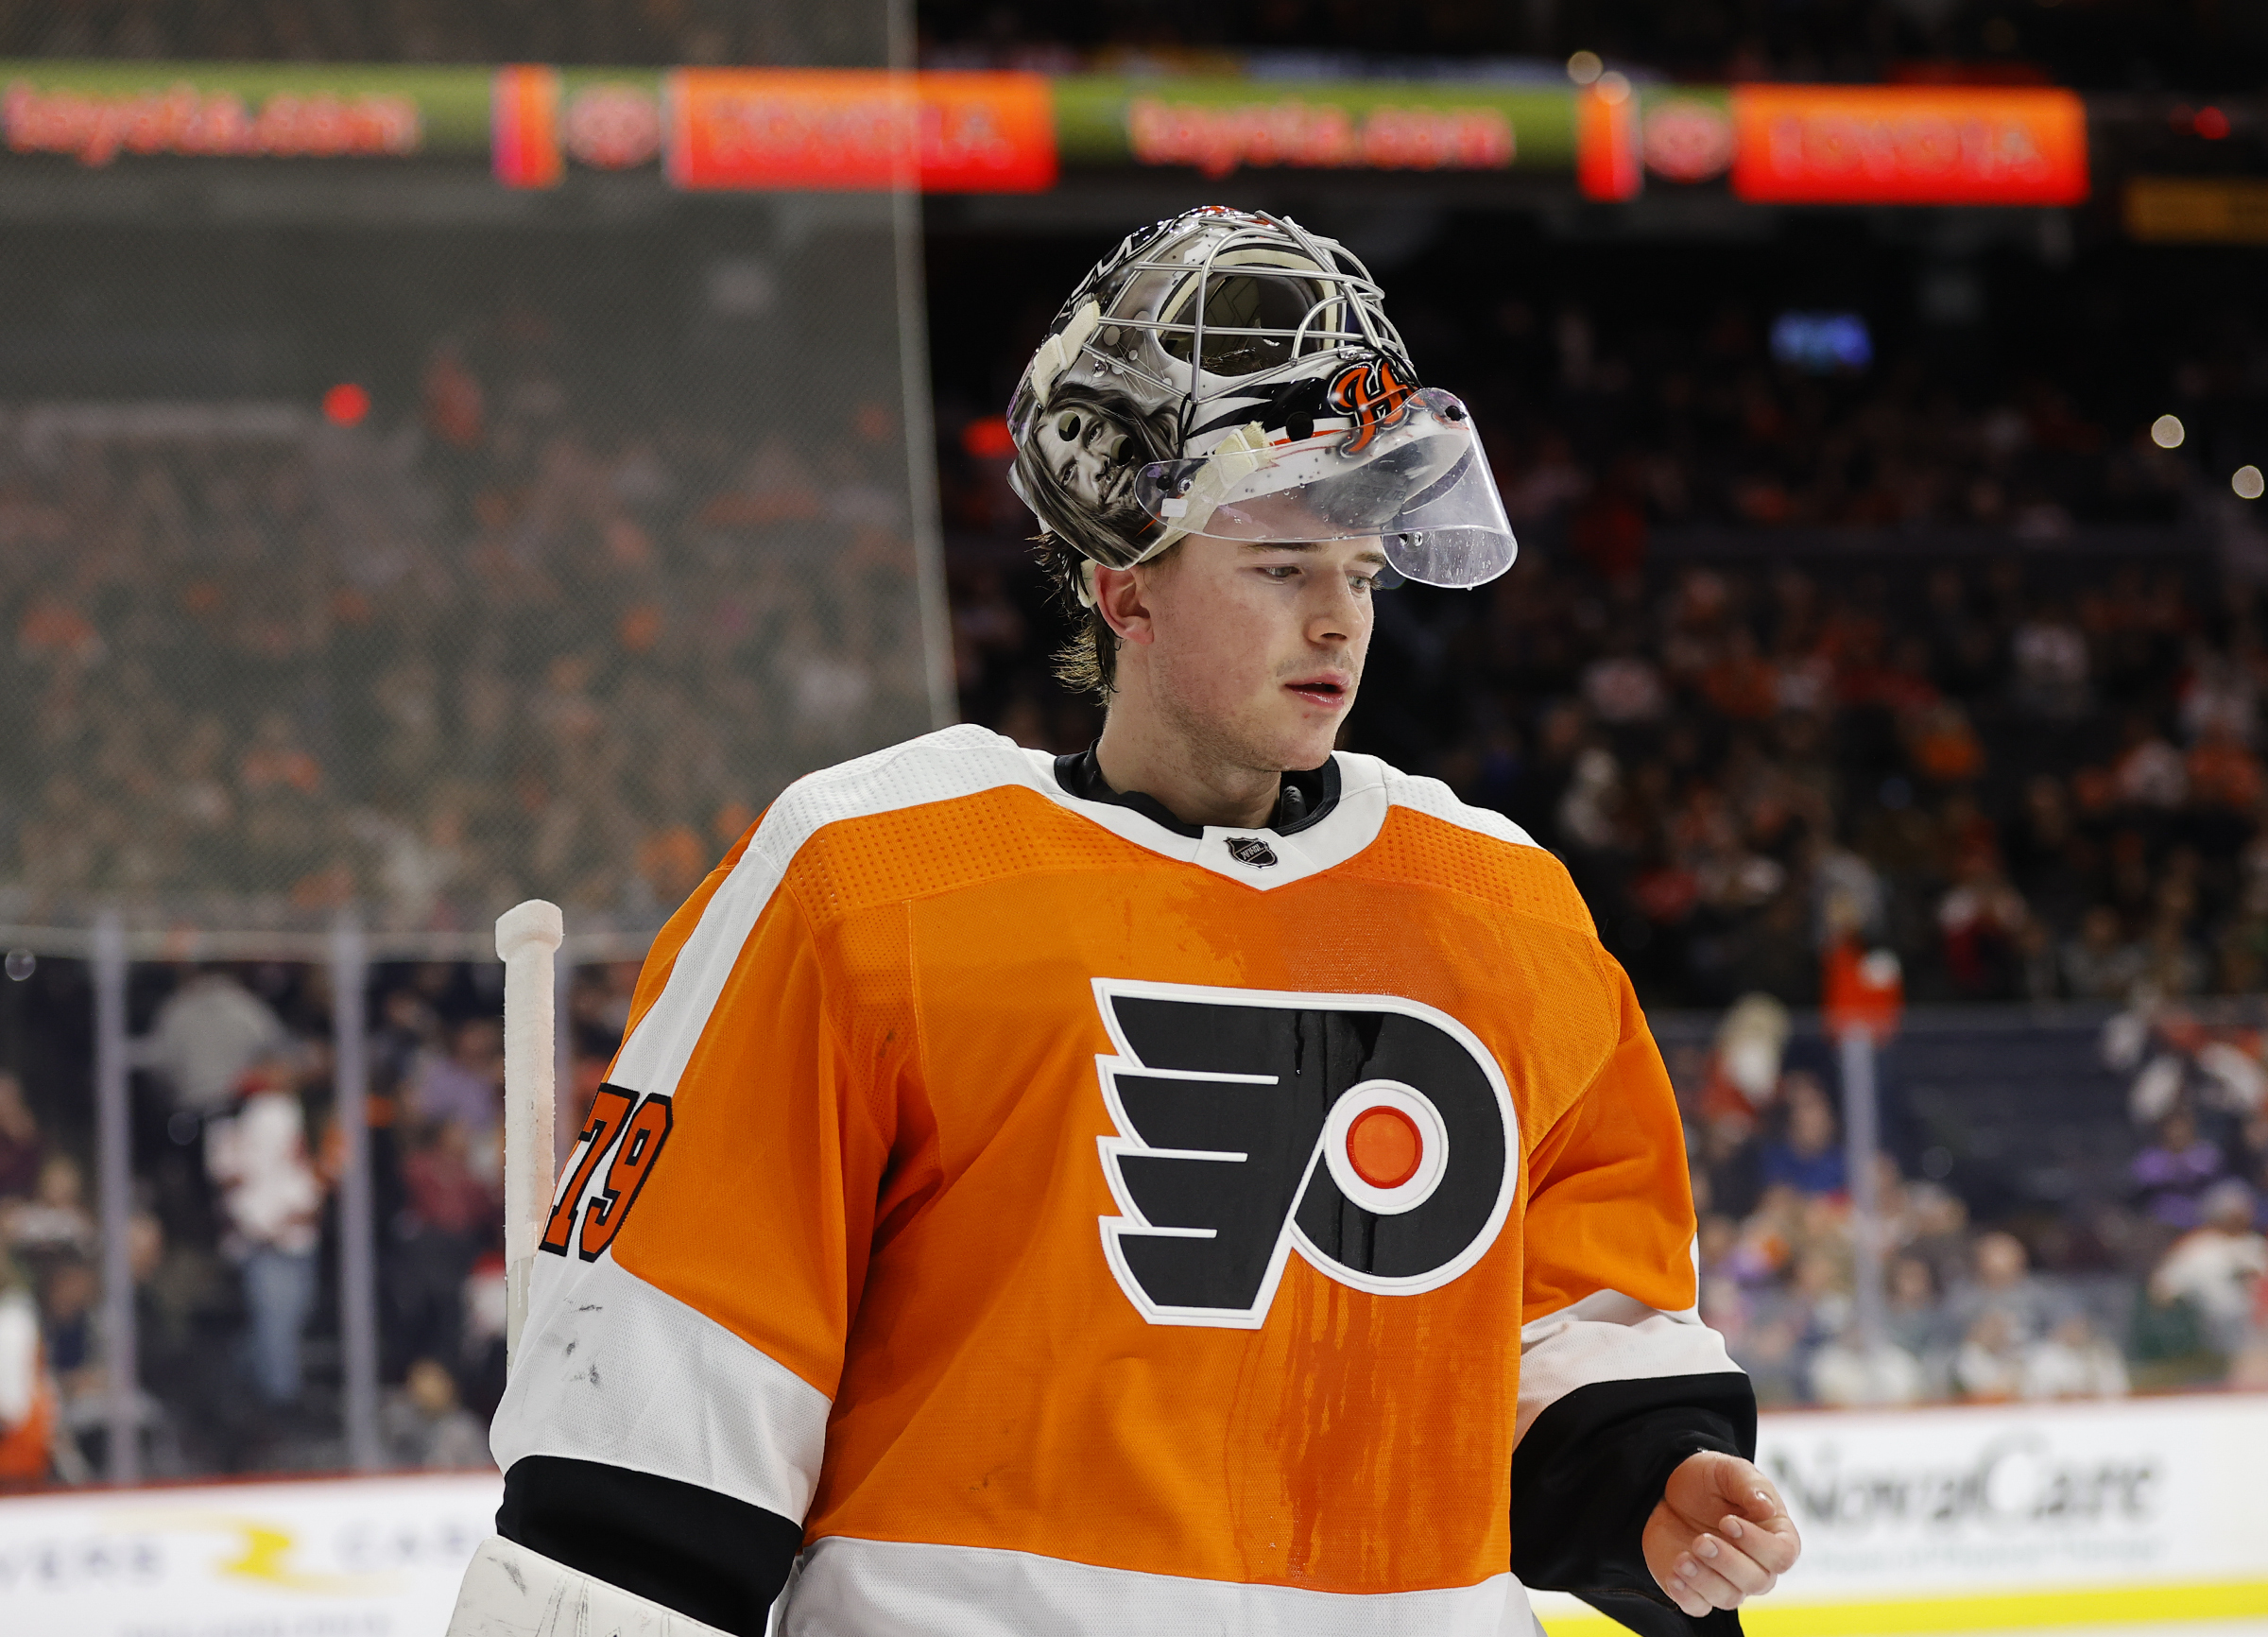 Flyers goalie Carter Hart in concussion protocol, on injured reserve